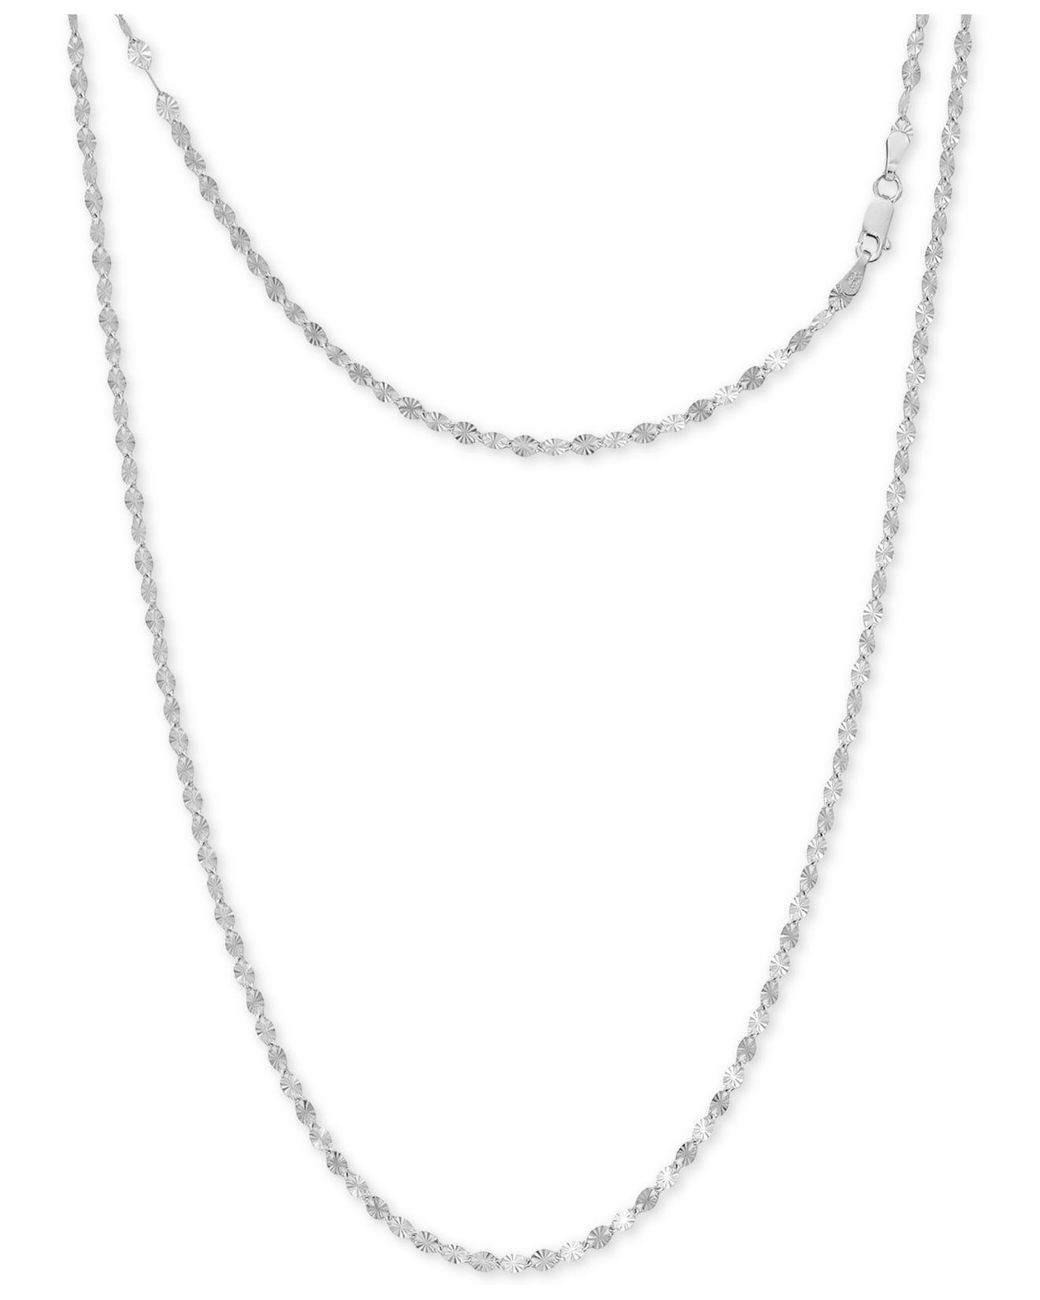 Beautiful 18" long layered SILVER tone chain & chunky patterned pendant necklace